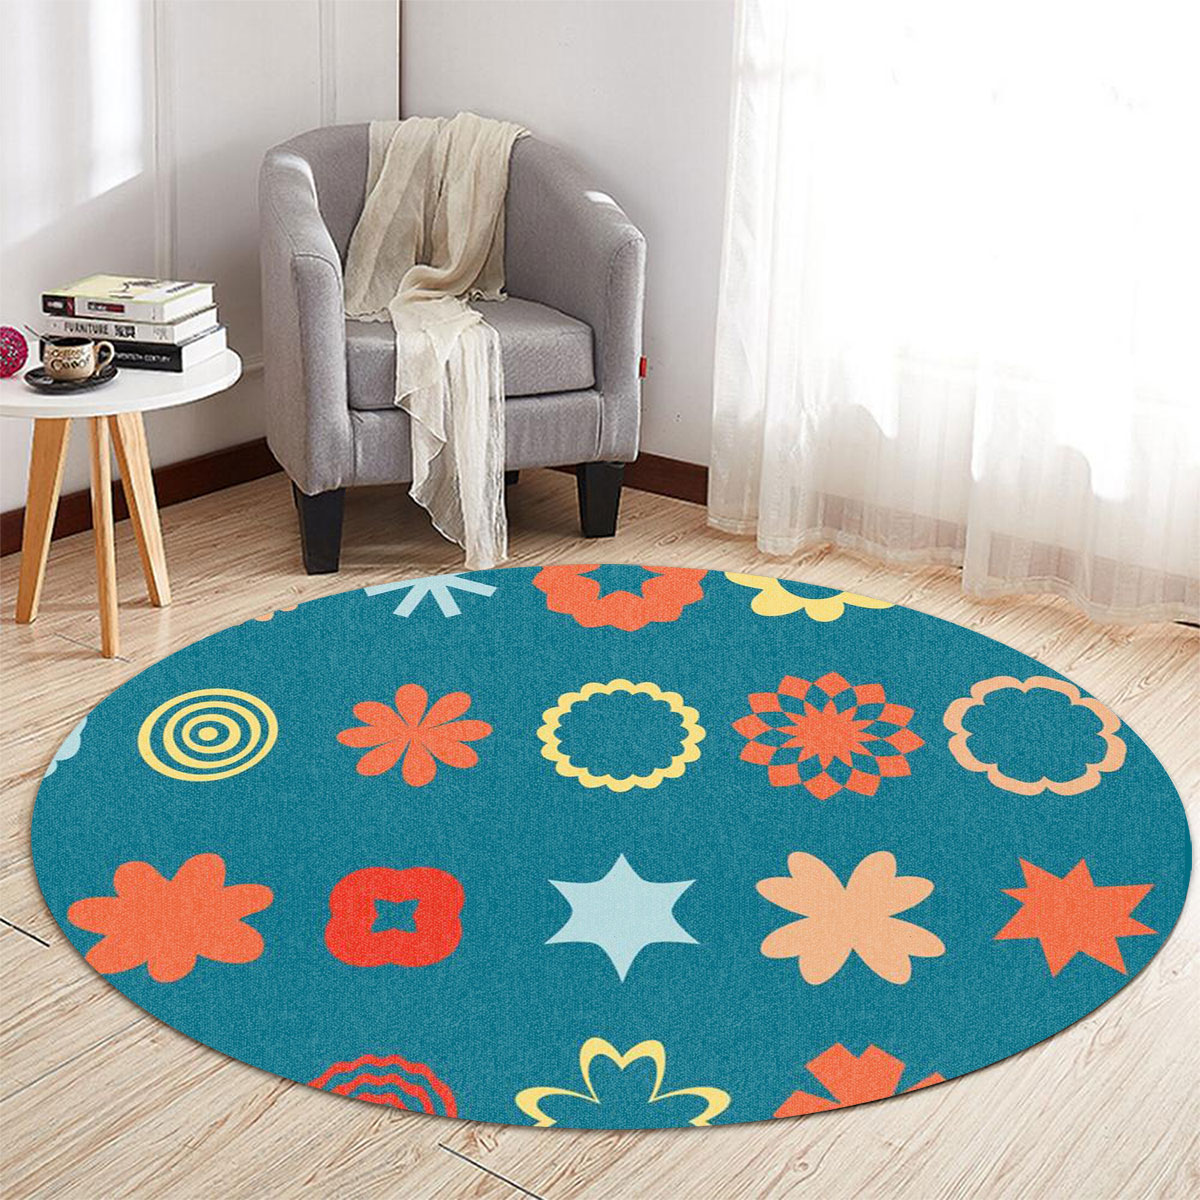 Floral Abstract Mid Century Modern Round Carpet